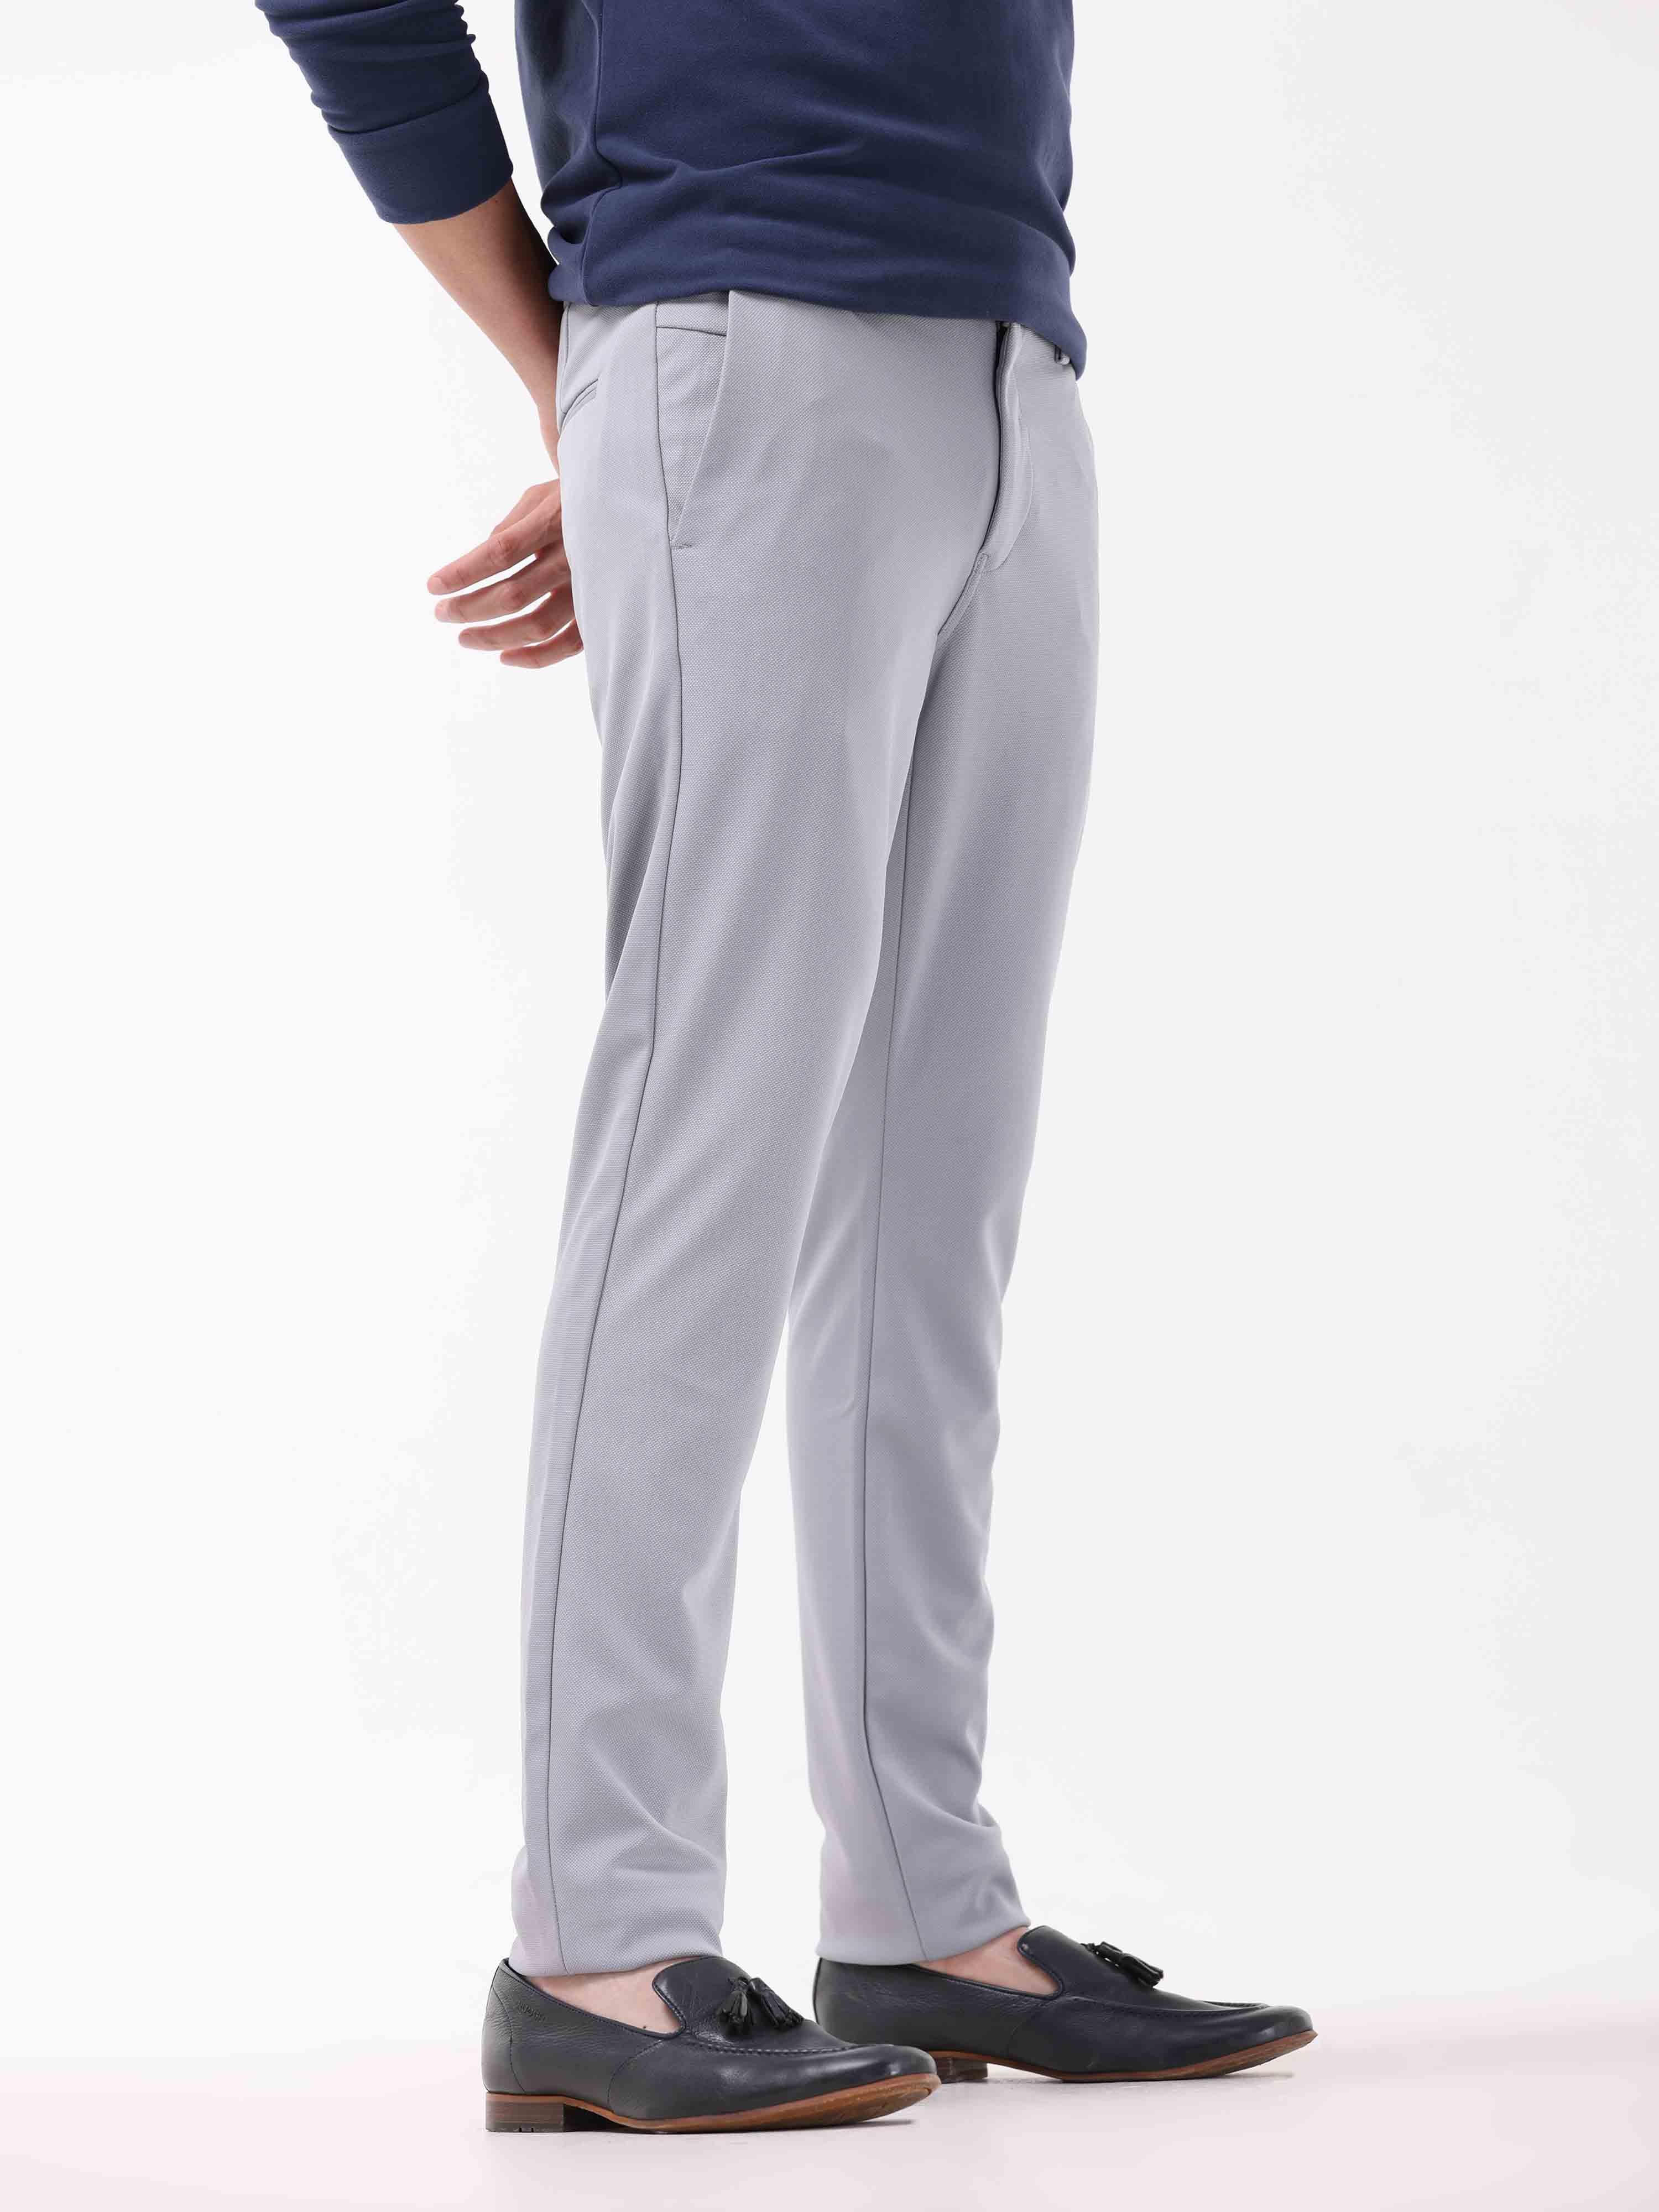 Buy Latest Navy Stretchable formal Trousers for Men Online